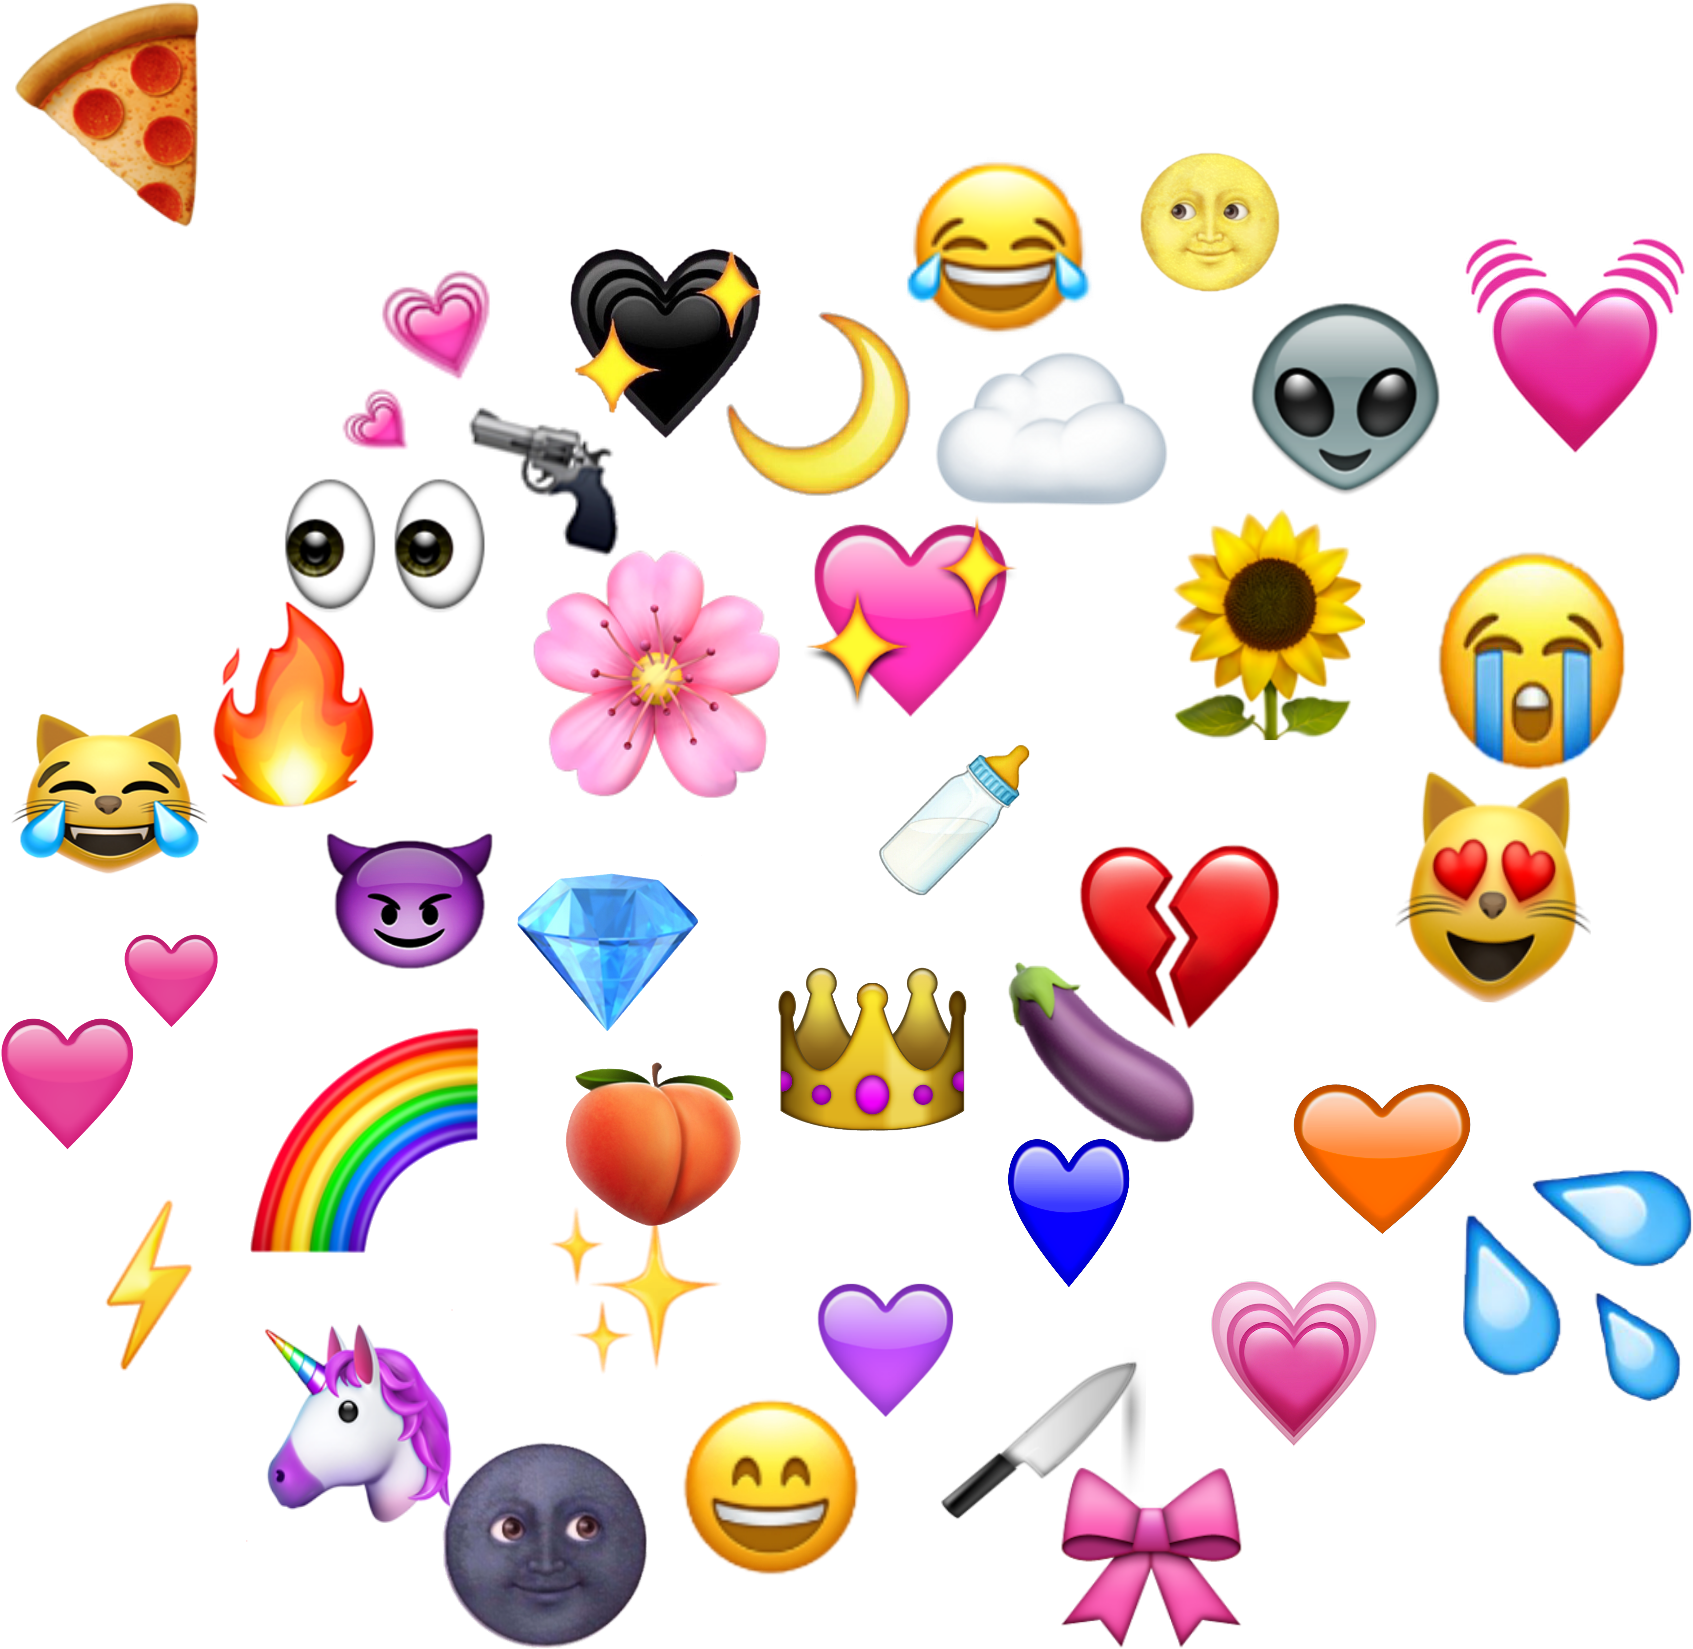 Assorted Emoji Collection PNG image